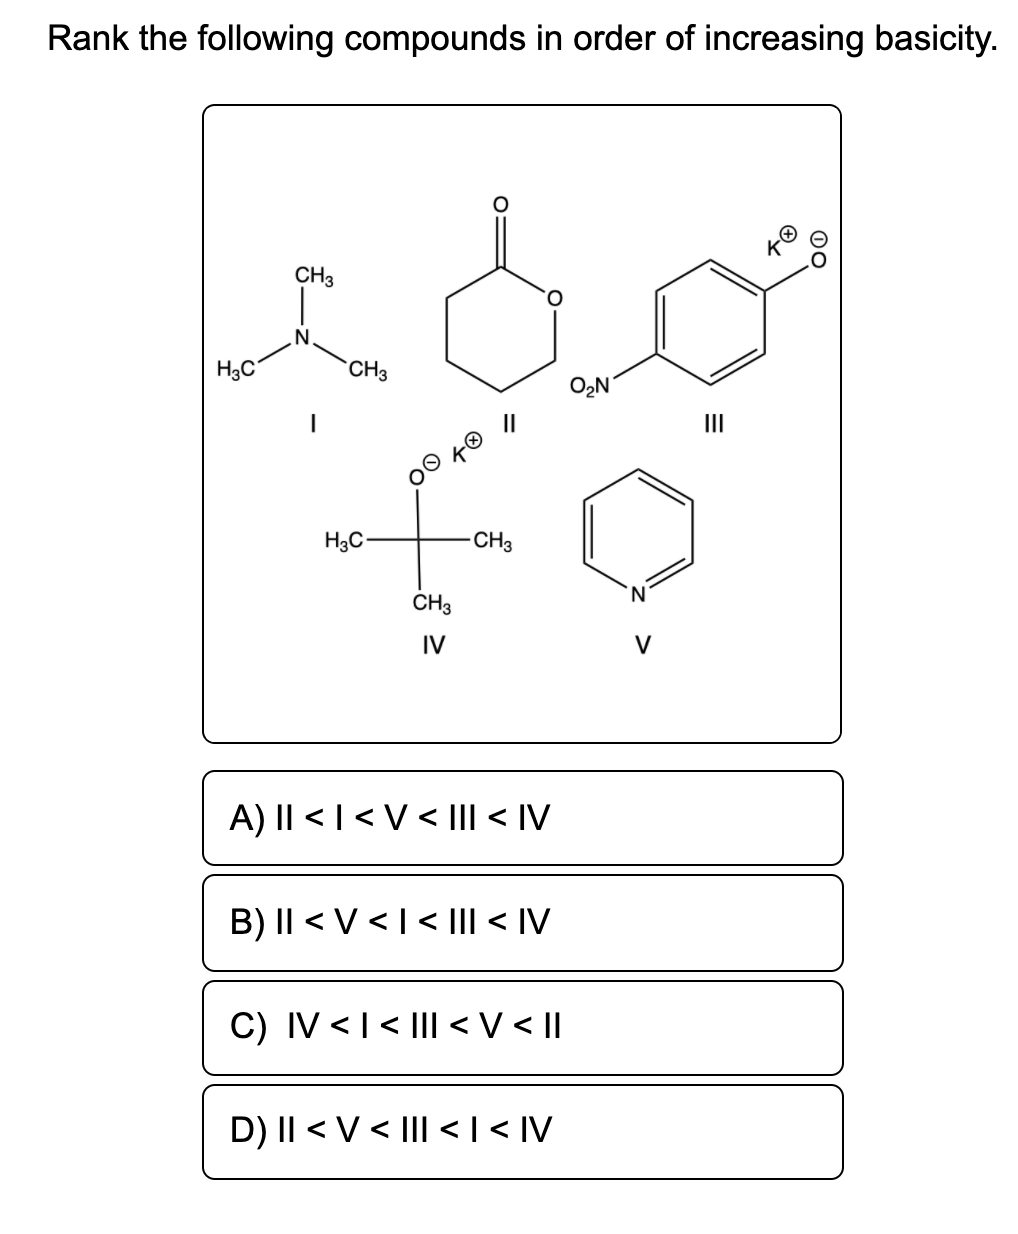 Rank the following compounds in order of increasing basicity.
CH3
H3C
`CH3
O2N
II
H3C-
CH3
CH3
N.
IV
V
A) I| < | < V < Il < IV
B) || < V <I< |Il < IV
C) IV < I < |II <V< ||
D) II < V < |II <|< IV
00
